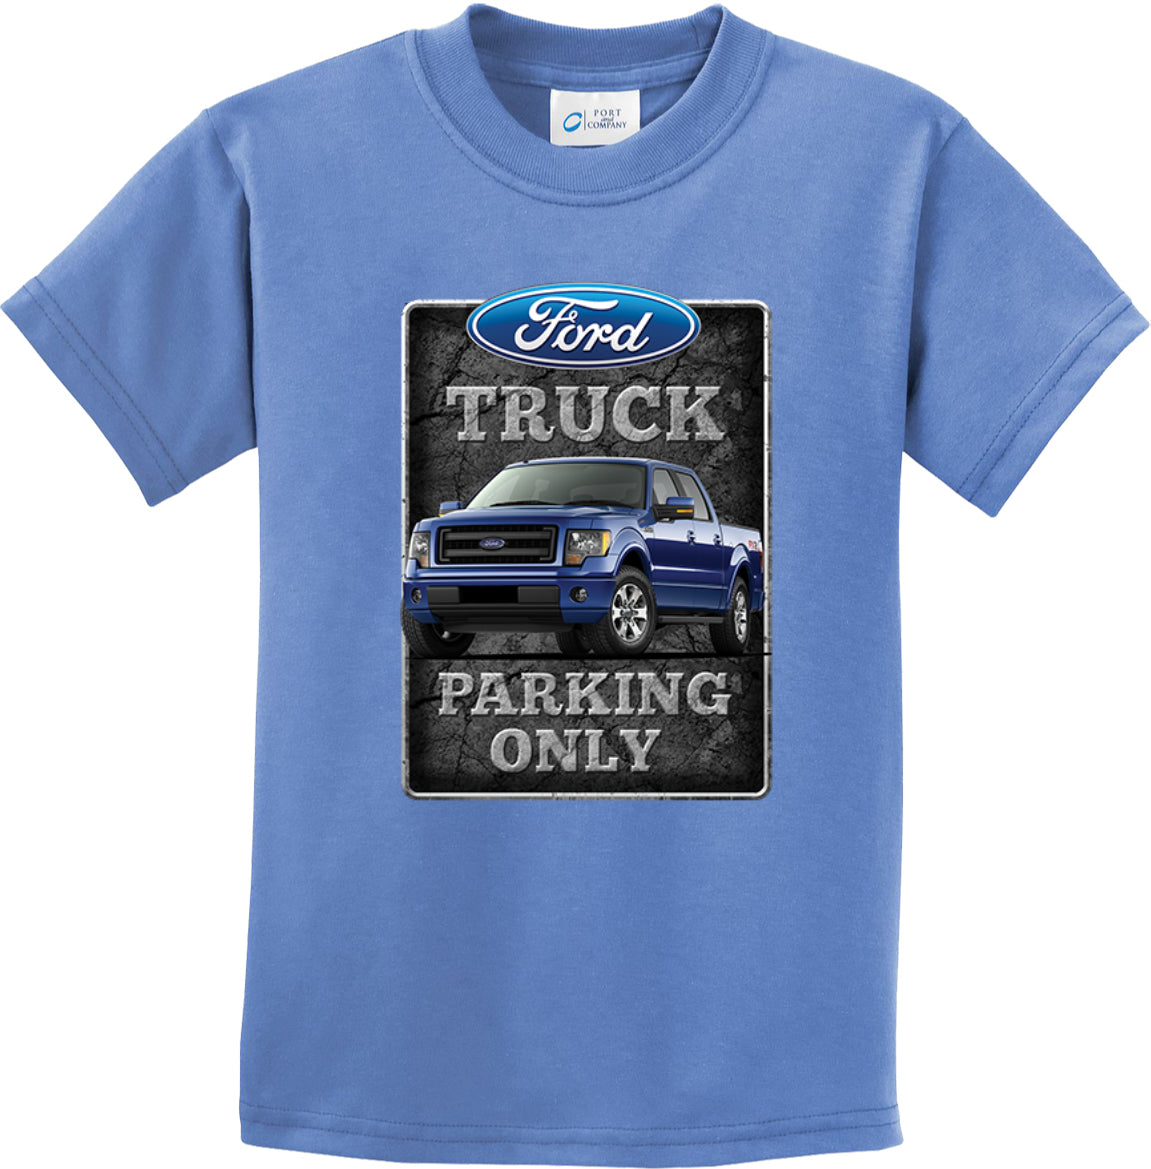 Kids Ford Truck T-shirt Parking Sign Youth Tee